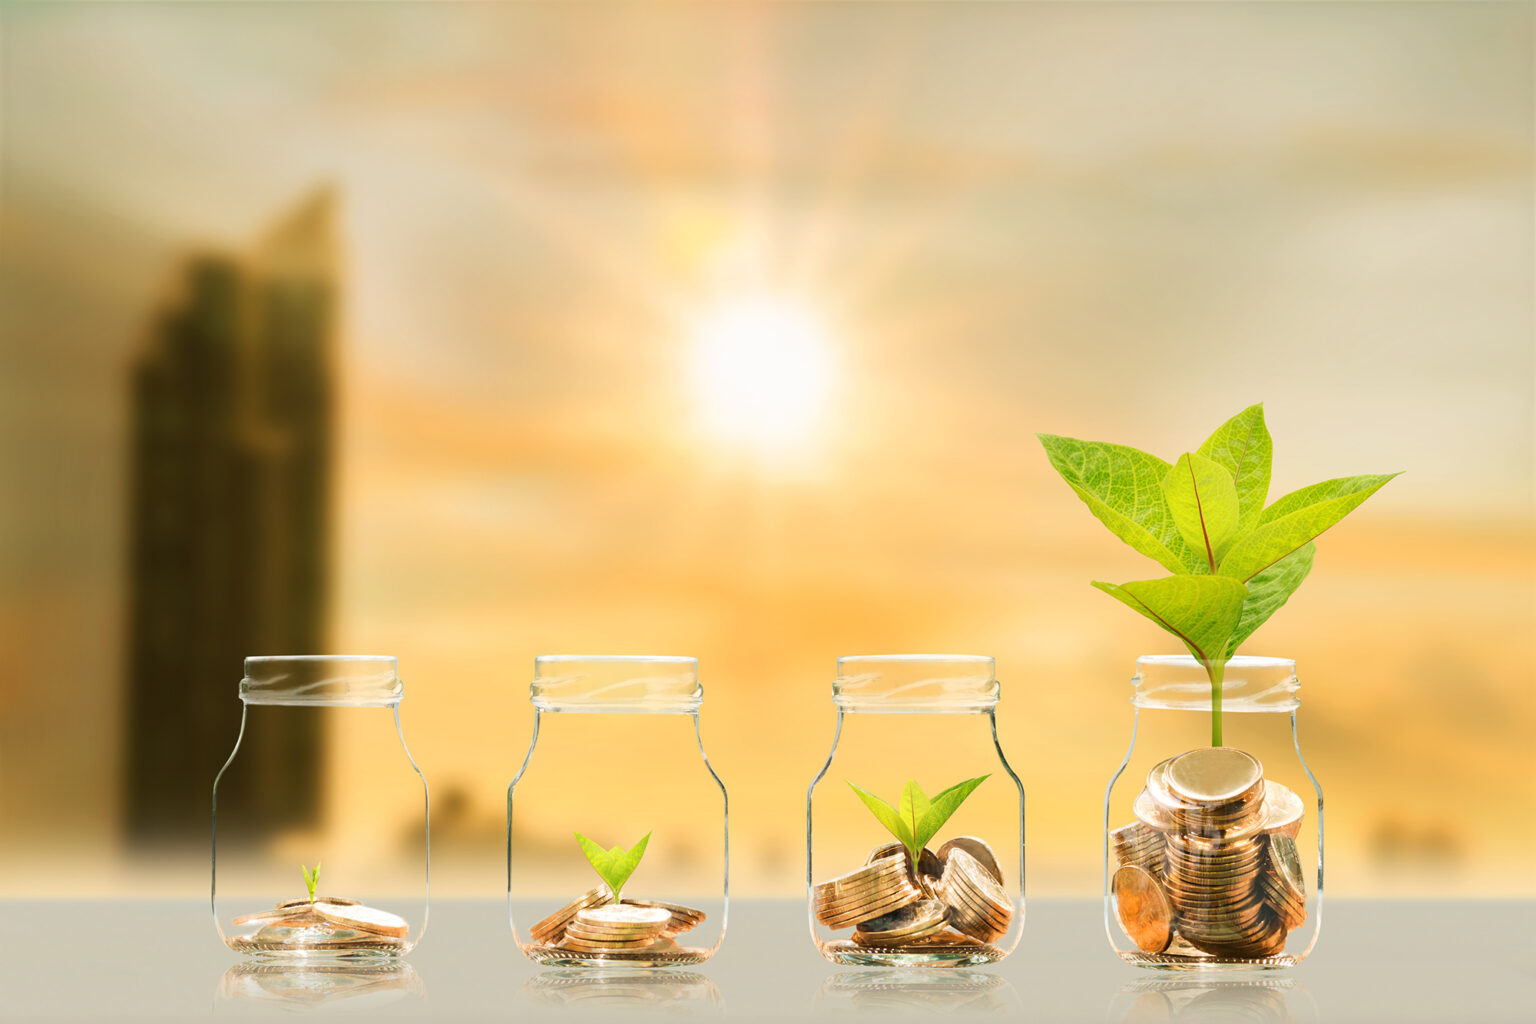 Coins in the growing sized bottles and plant growing with savings money on photo blur cityscape on sunlight background